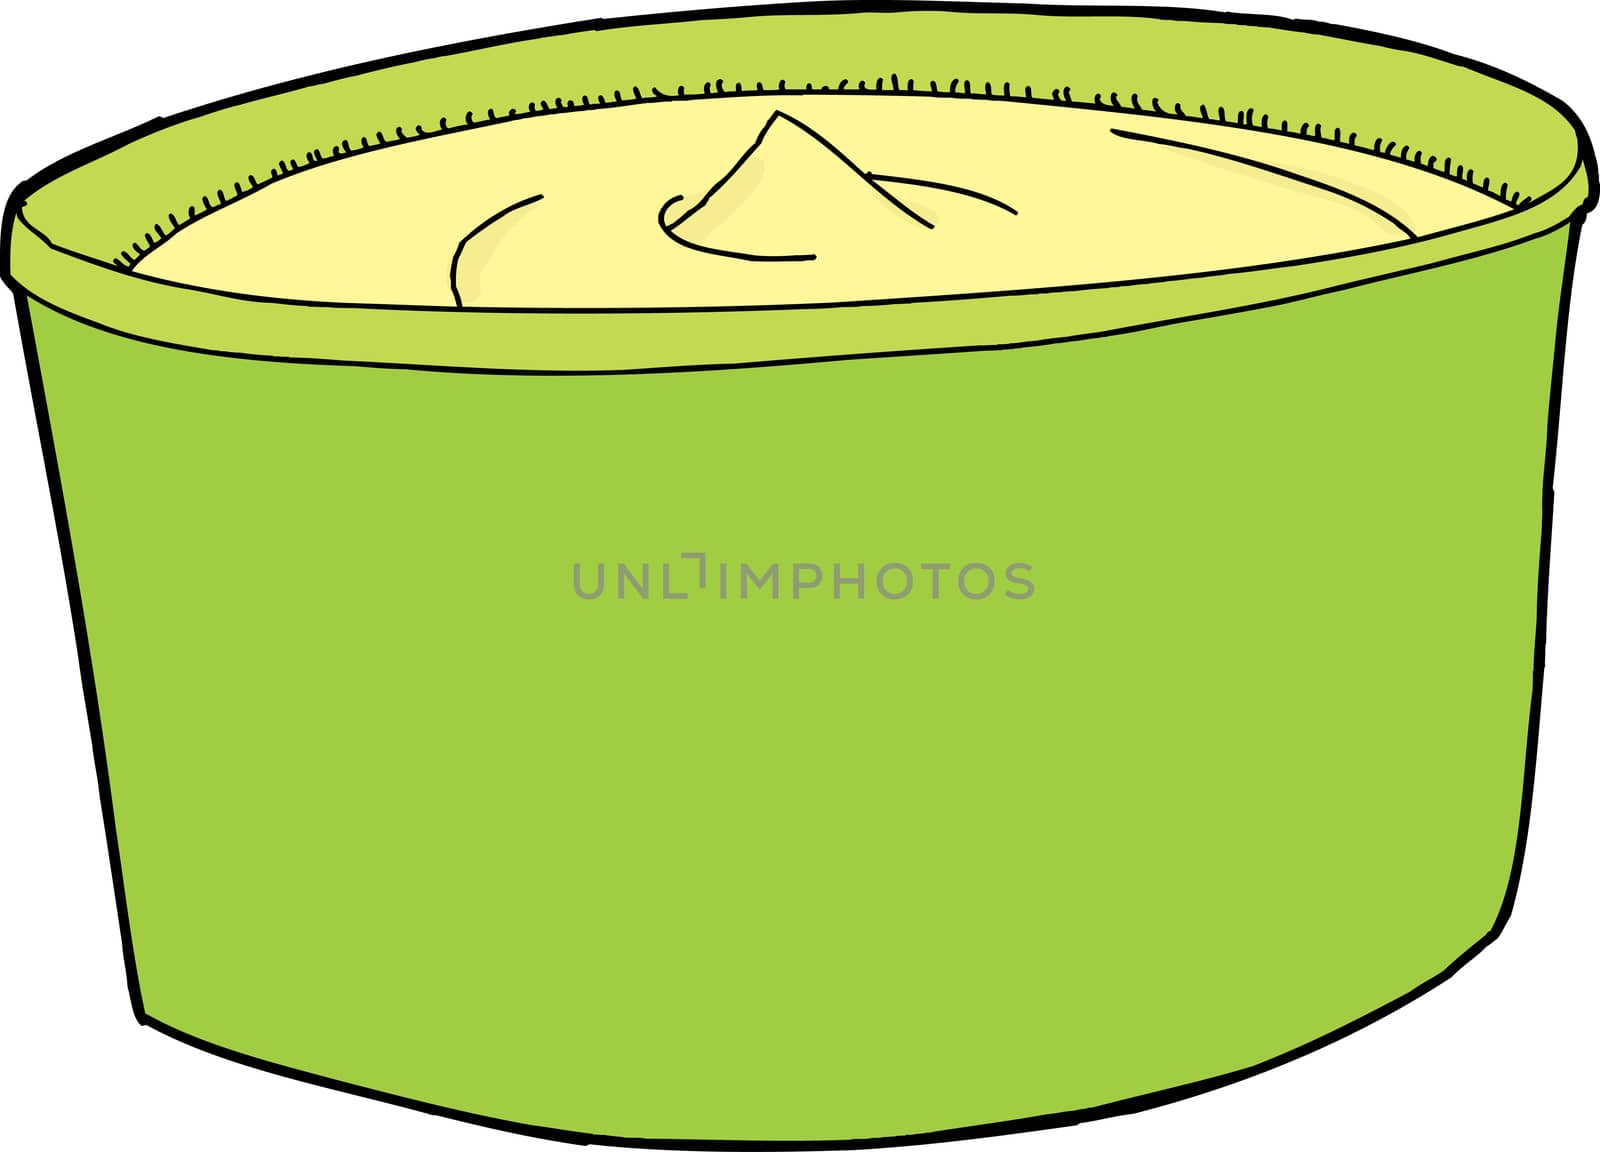 Container full of spreadable butter on white background